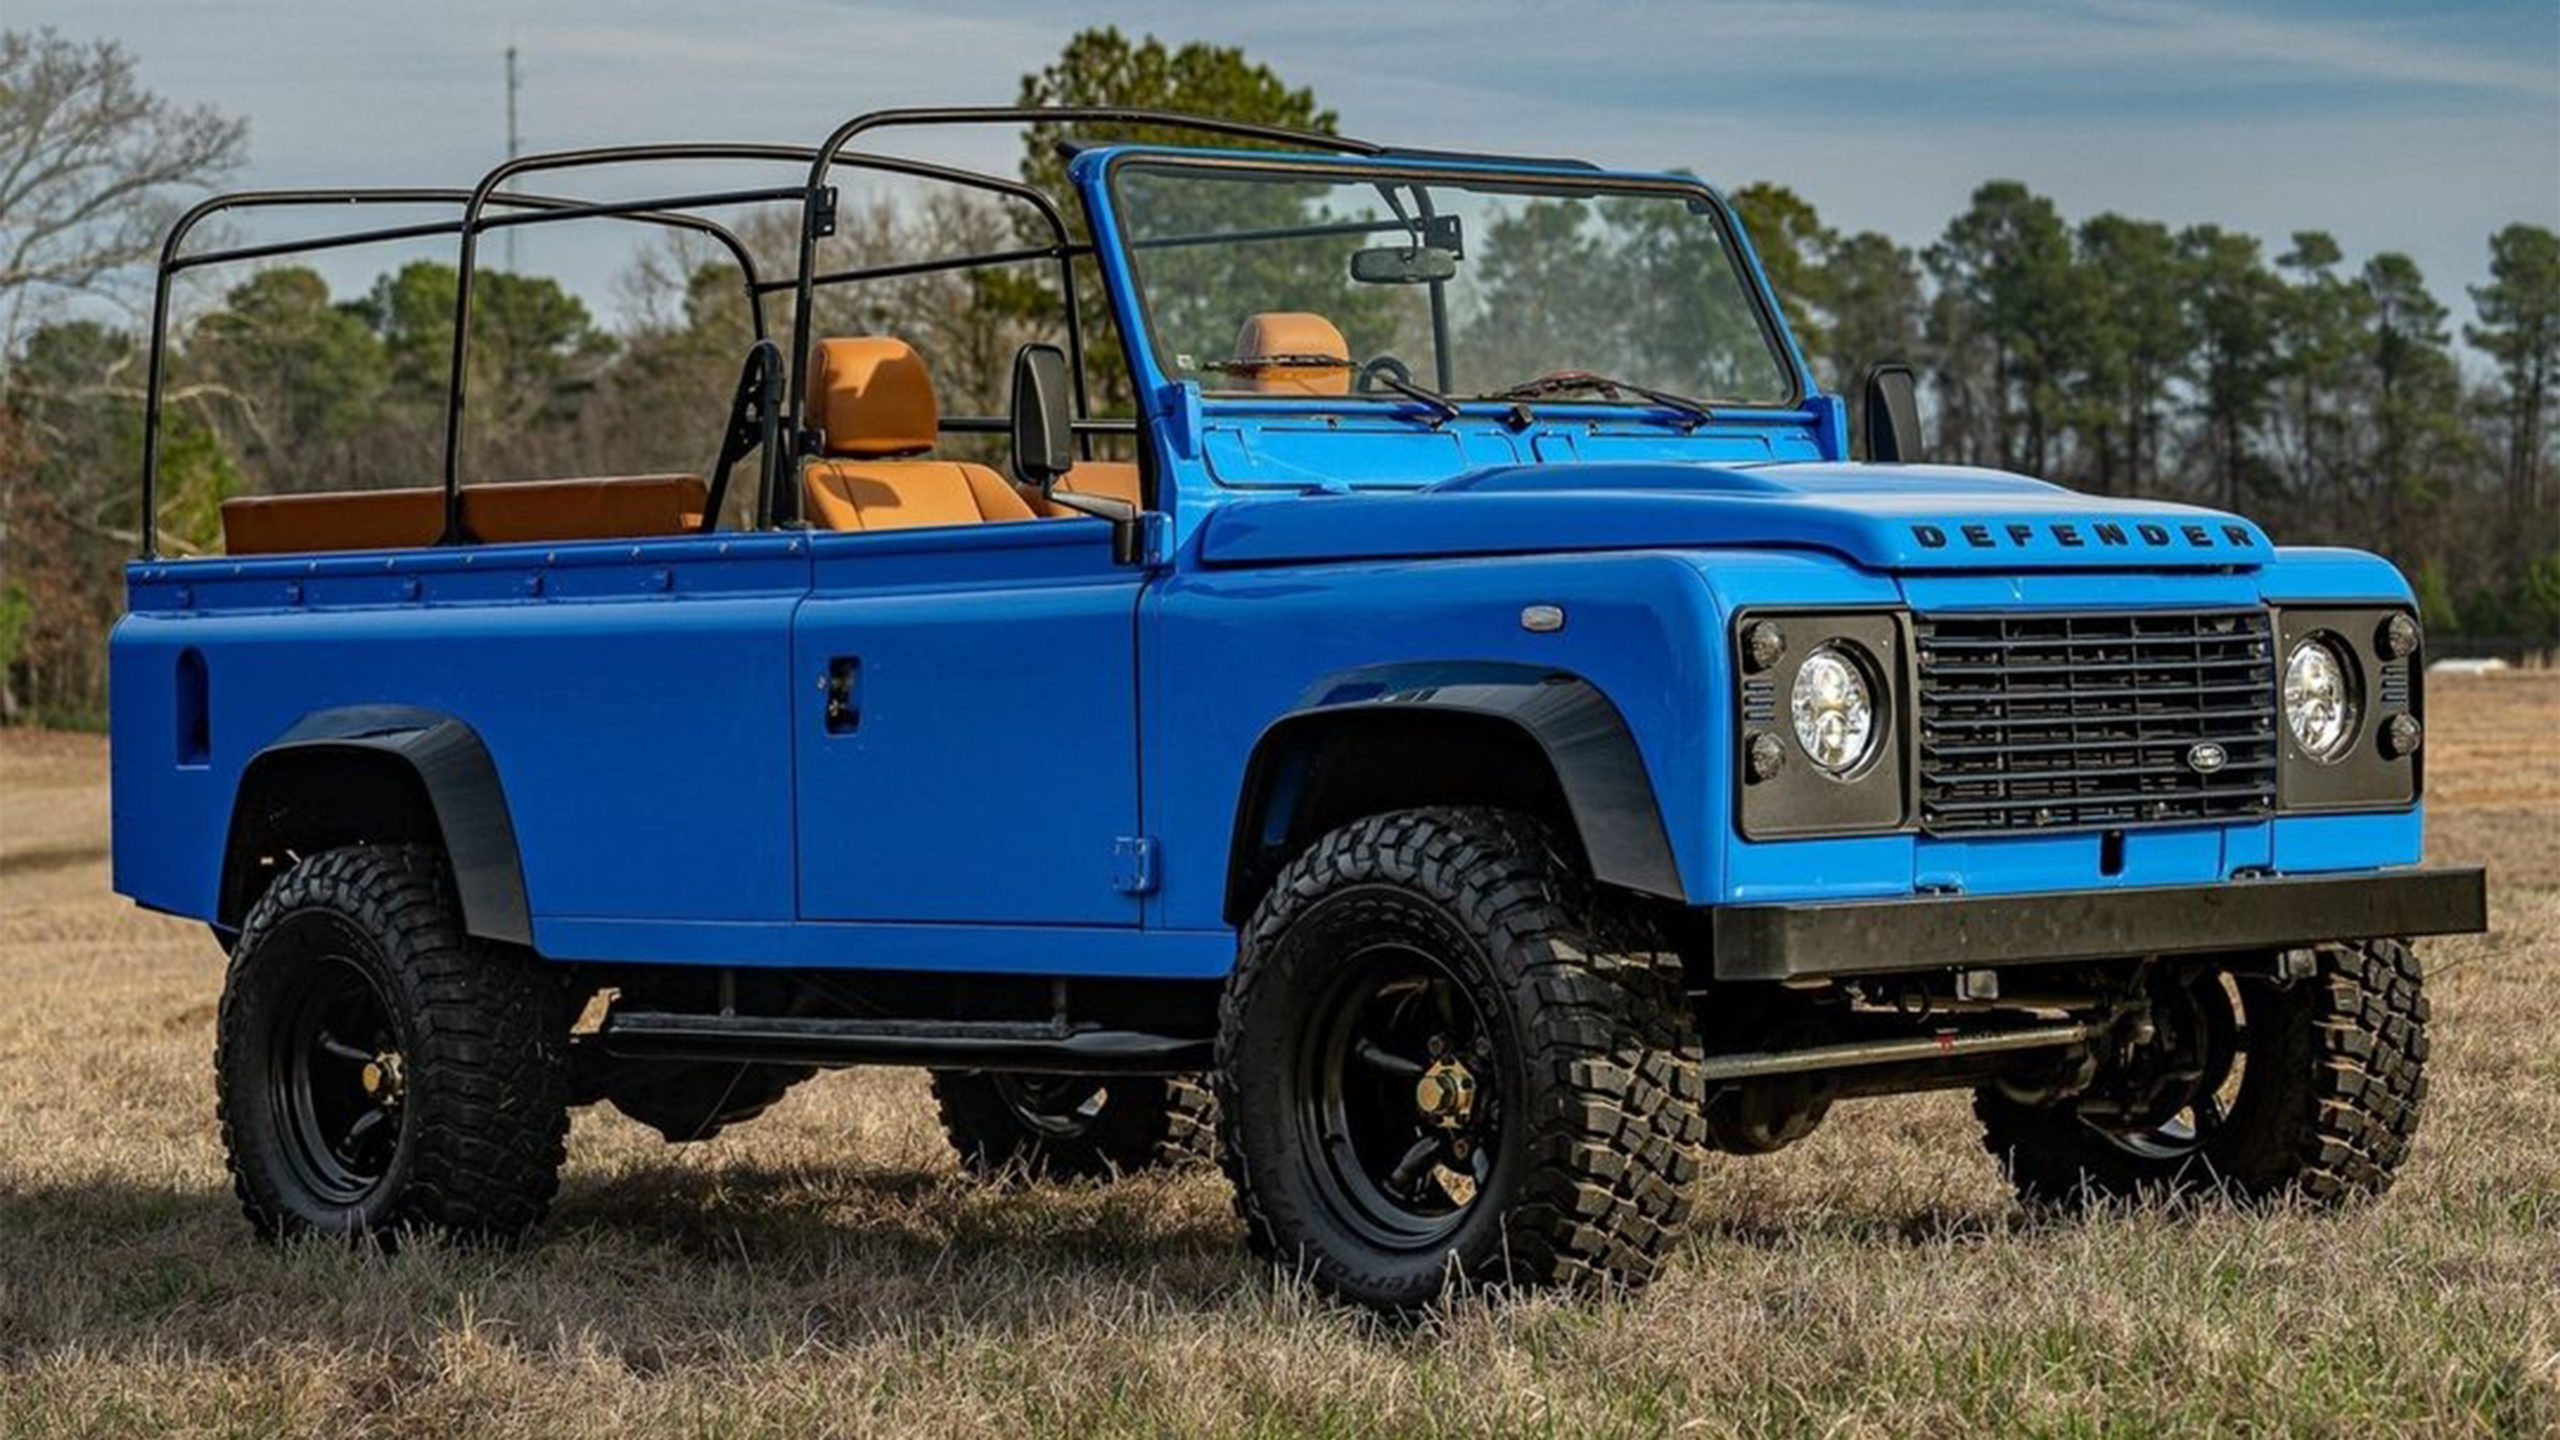 The Land Rover Defender 110: A Classic British SUV for Off-Road Adventures